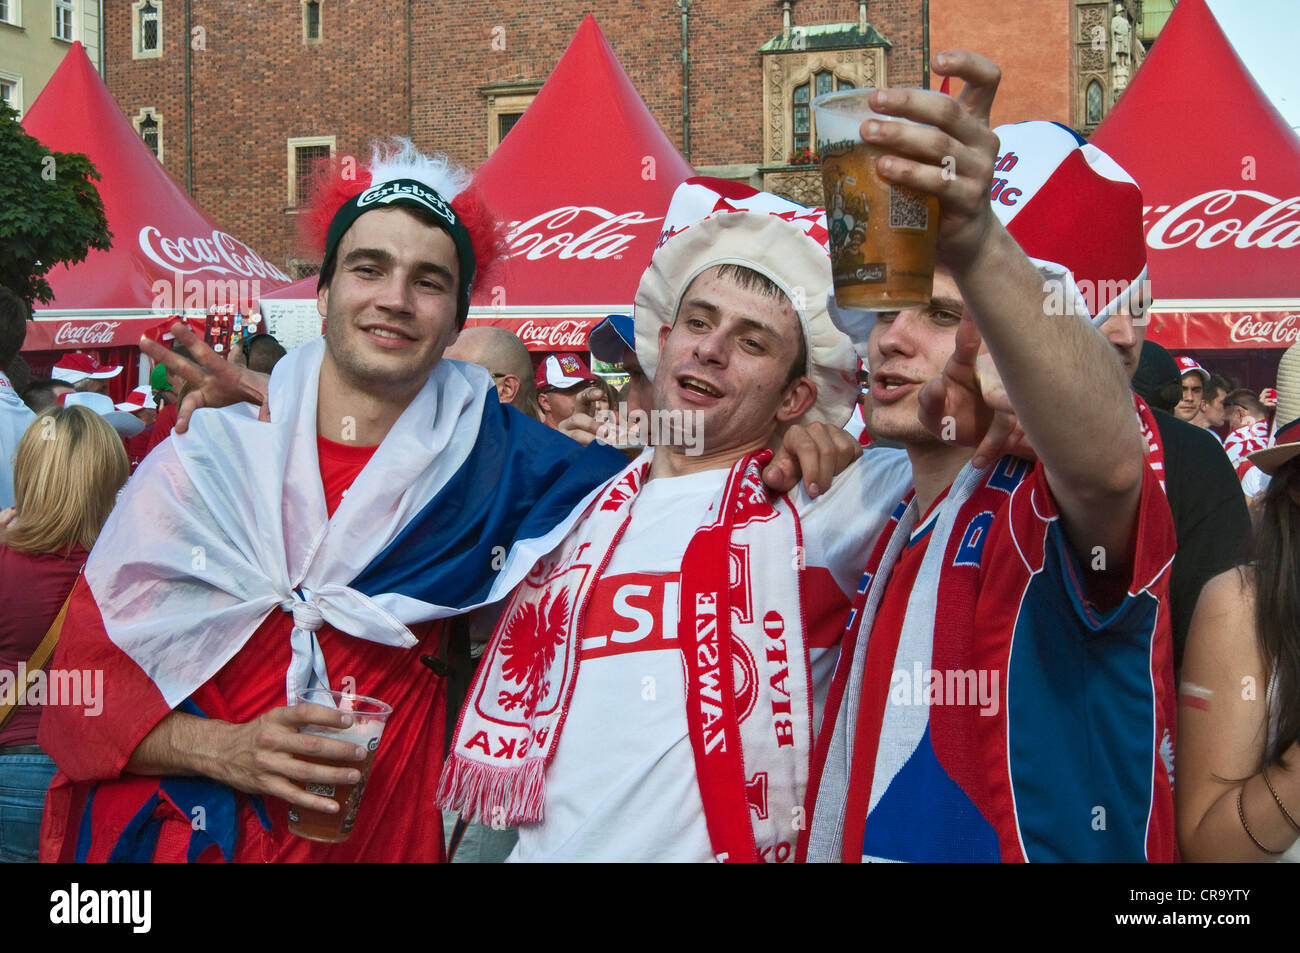 Czech and Polish soccer fans during EURO 2012 Football Championship at Fan Zone at Rynek (Market Square) in Wrocław, Poland Stock Photo